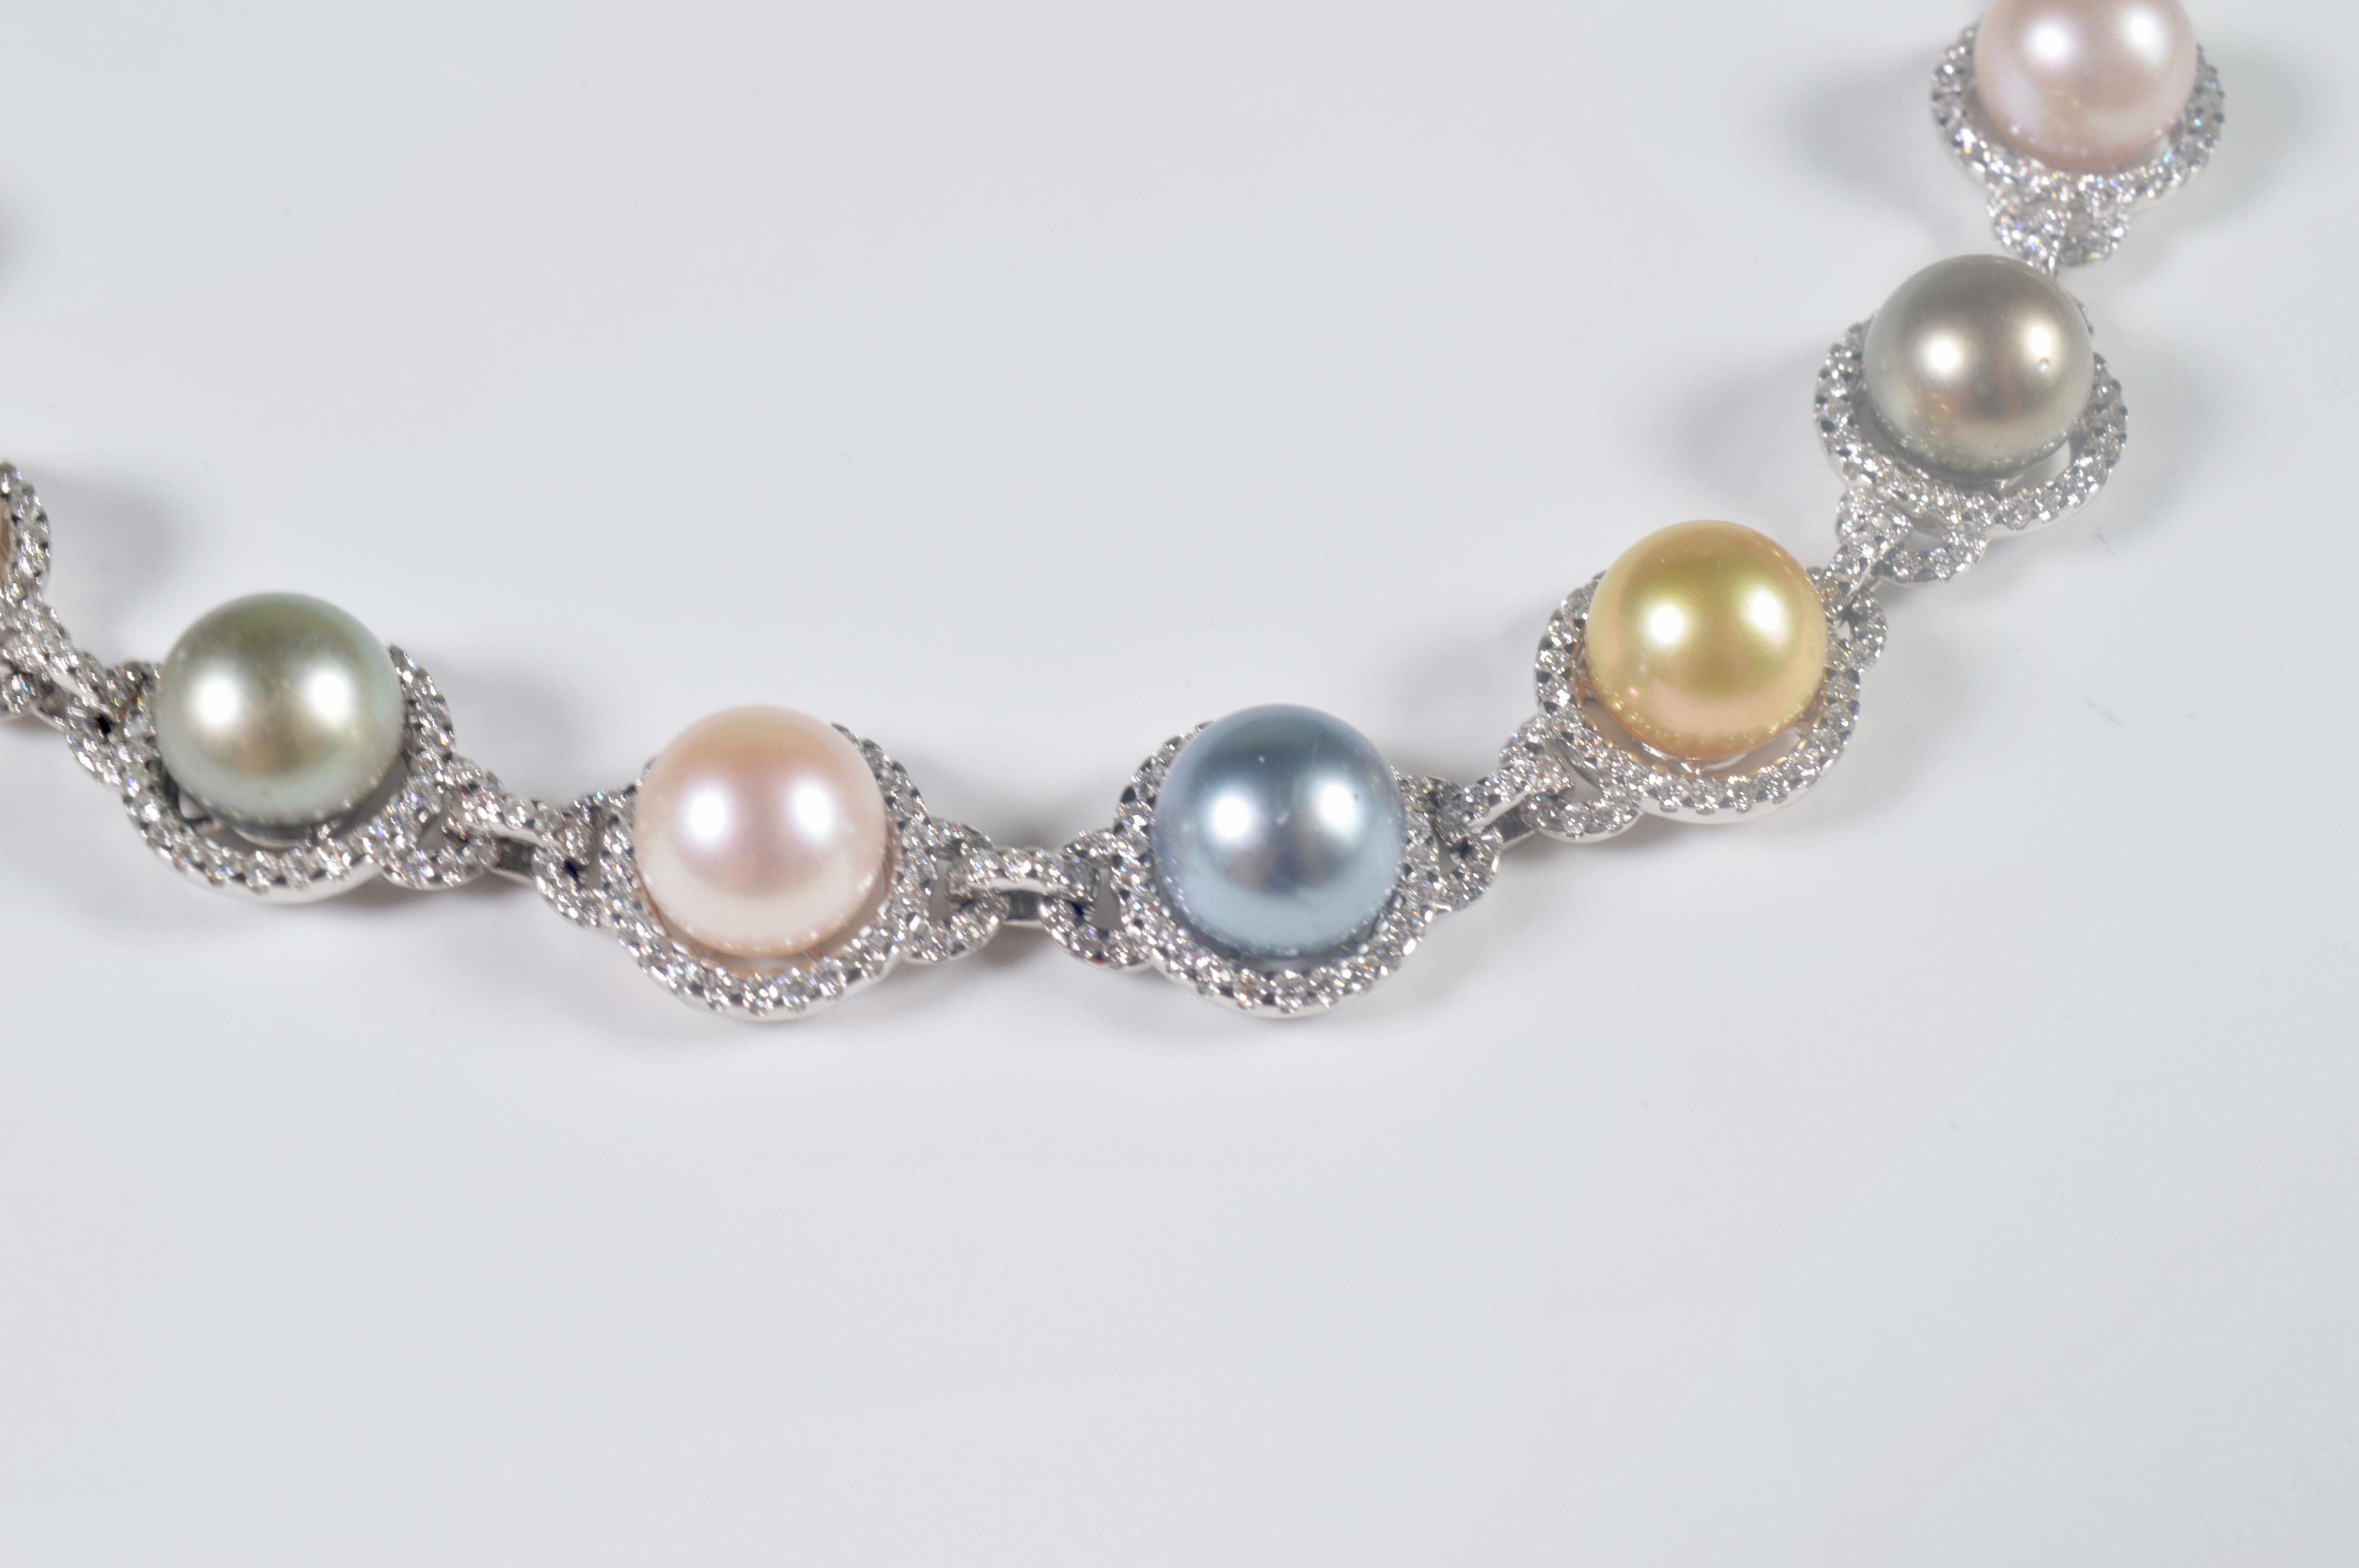 Modern White Gold, South Sea Pearl, Tahitian Pearl and Diamond Necklace 9.53 Carat